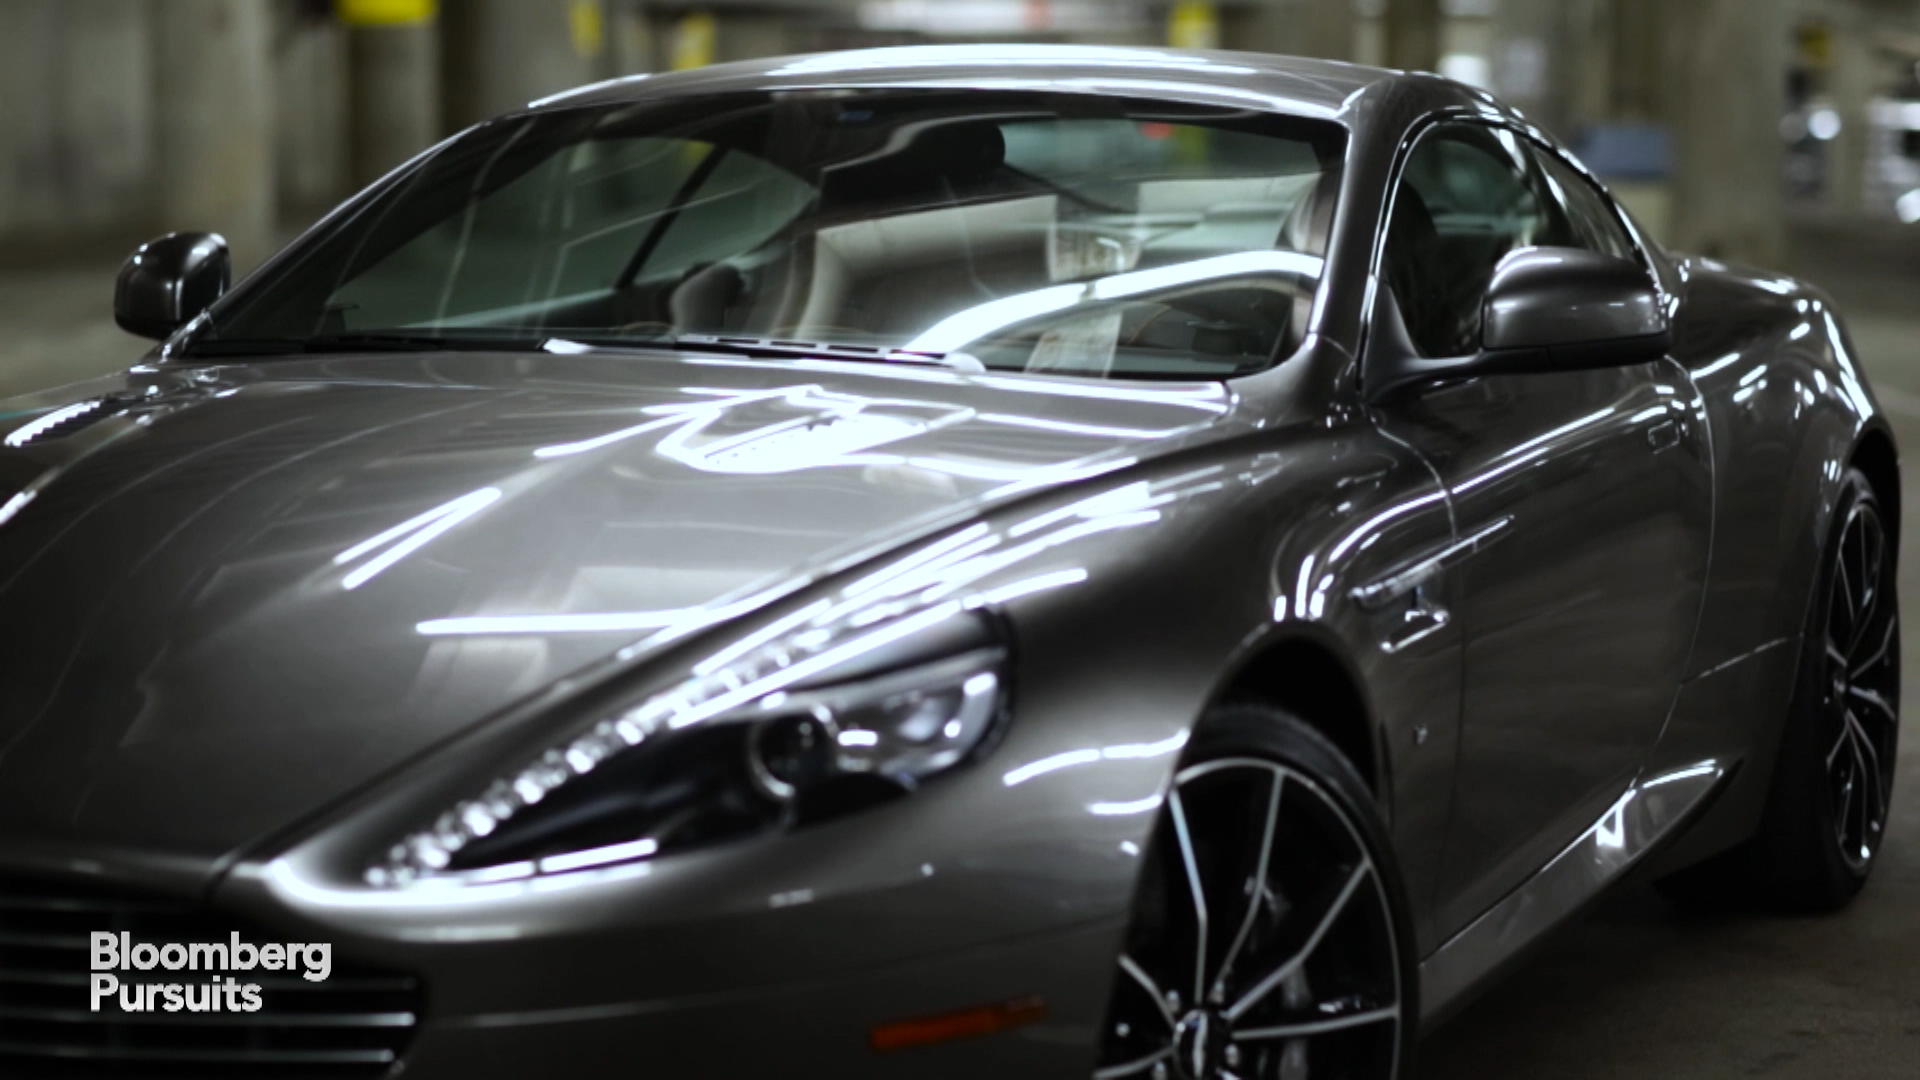 The 2016 Aston Martin Db9 Gt Is James Bond Perfect Bloomberg